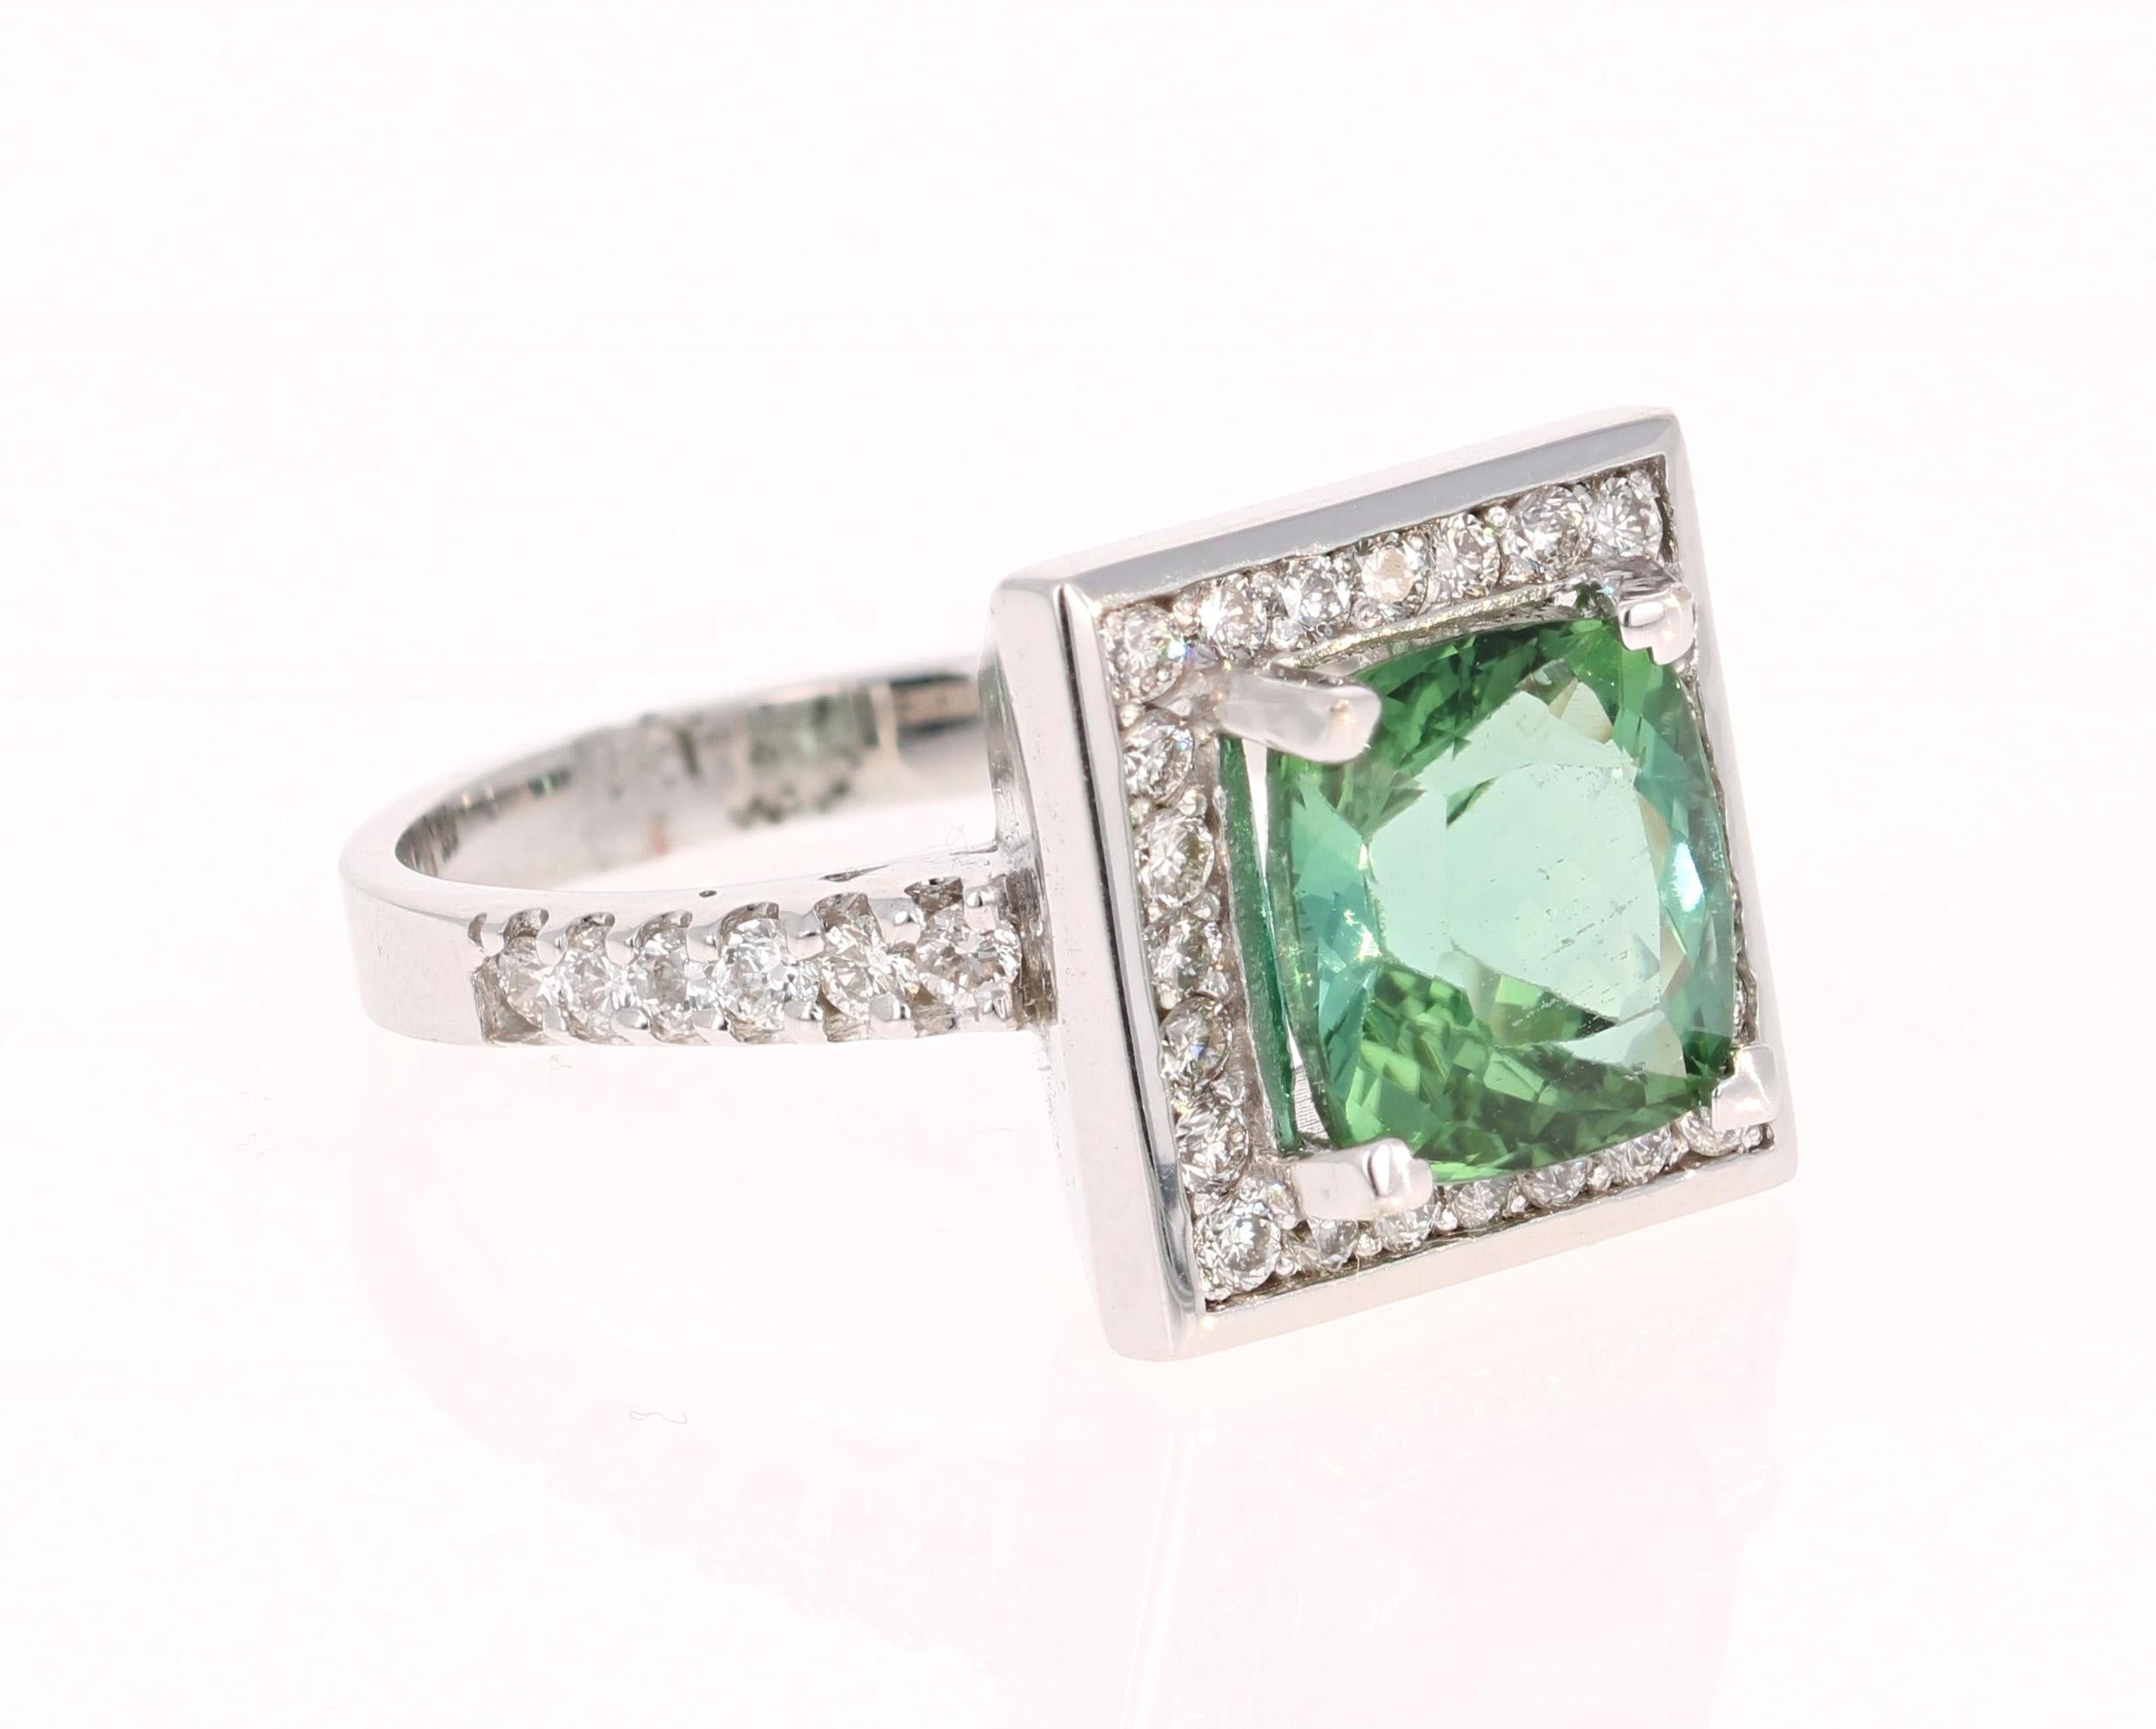 This ring has a magnificently beautiful Cushion Cut Green Tourmaline that weighs 3.14 Carats and has 36 Round Cut Diamonds weighing 0.67 Carats with a clarity and color of VS-F. The total carat weight of the ring is 3.81 Carats.

The ring is made in